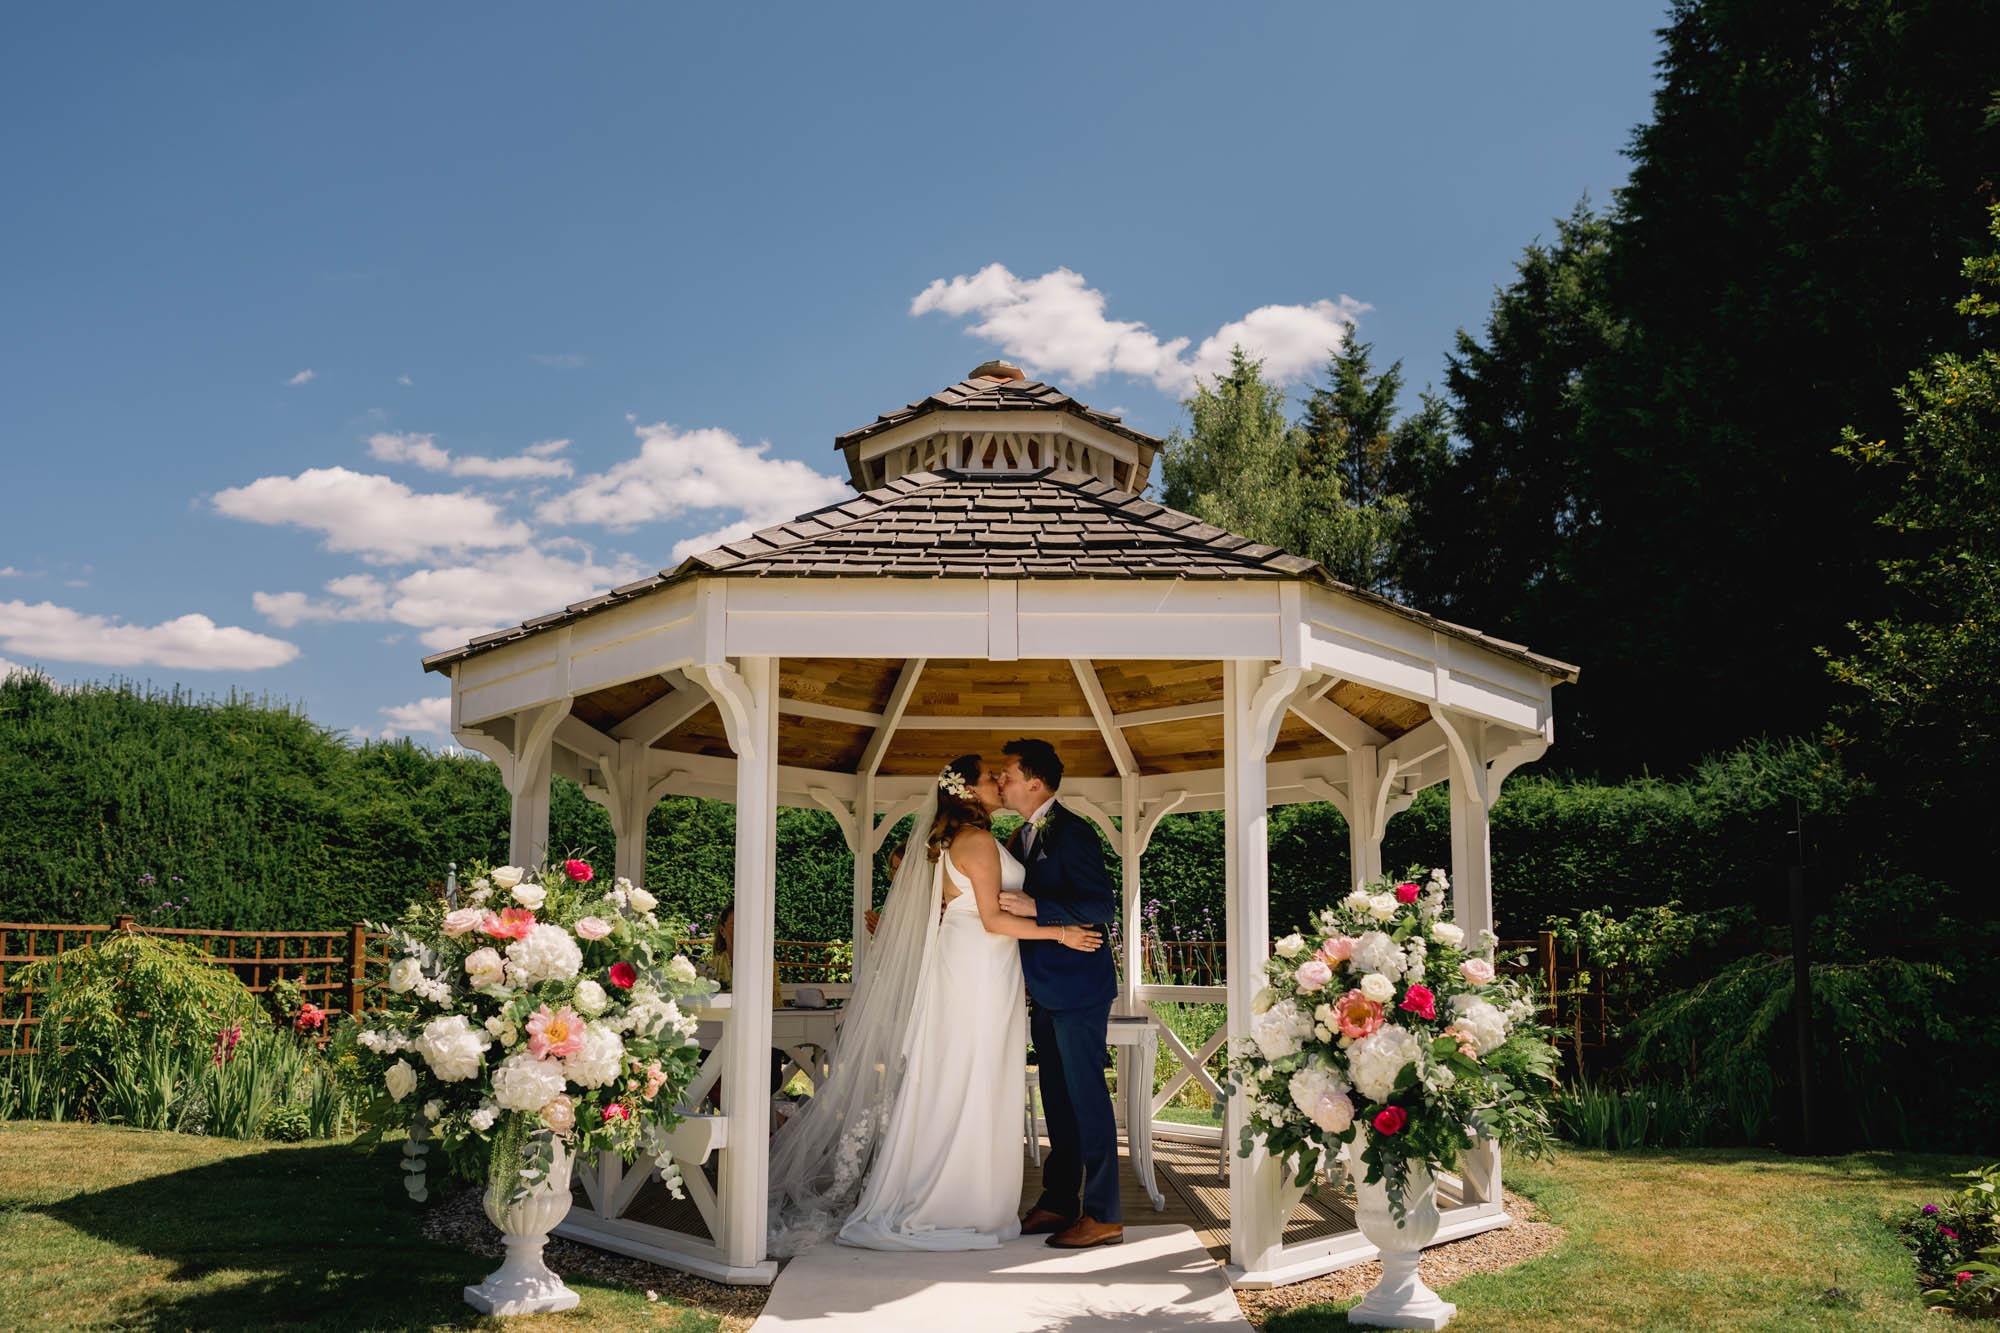 Bride and groom kiss on their wedding day at Hartsfield Manor.